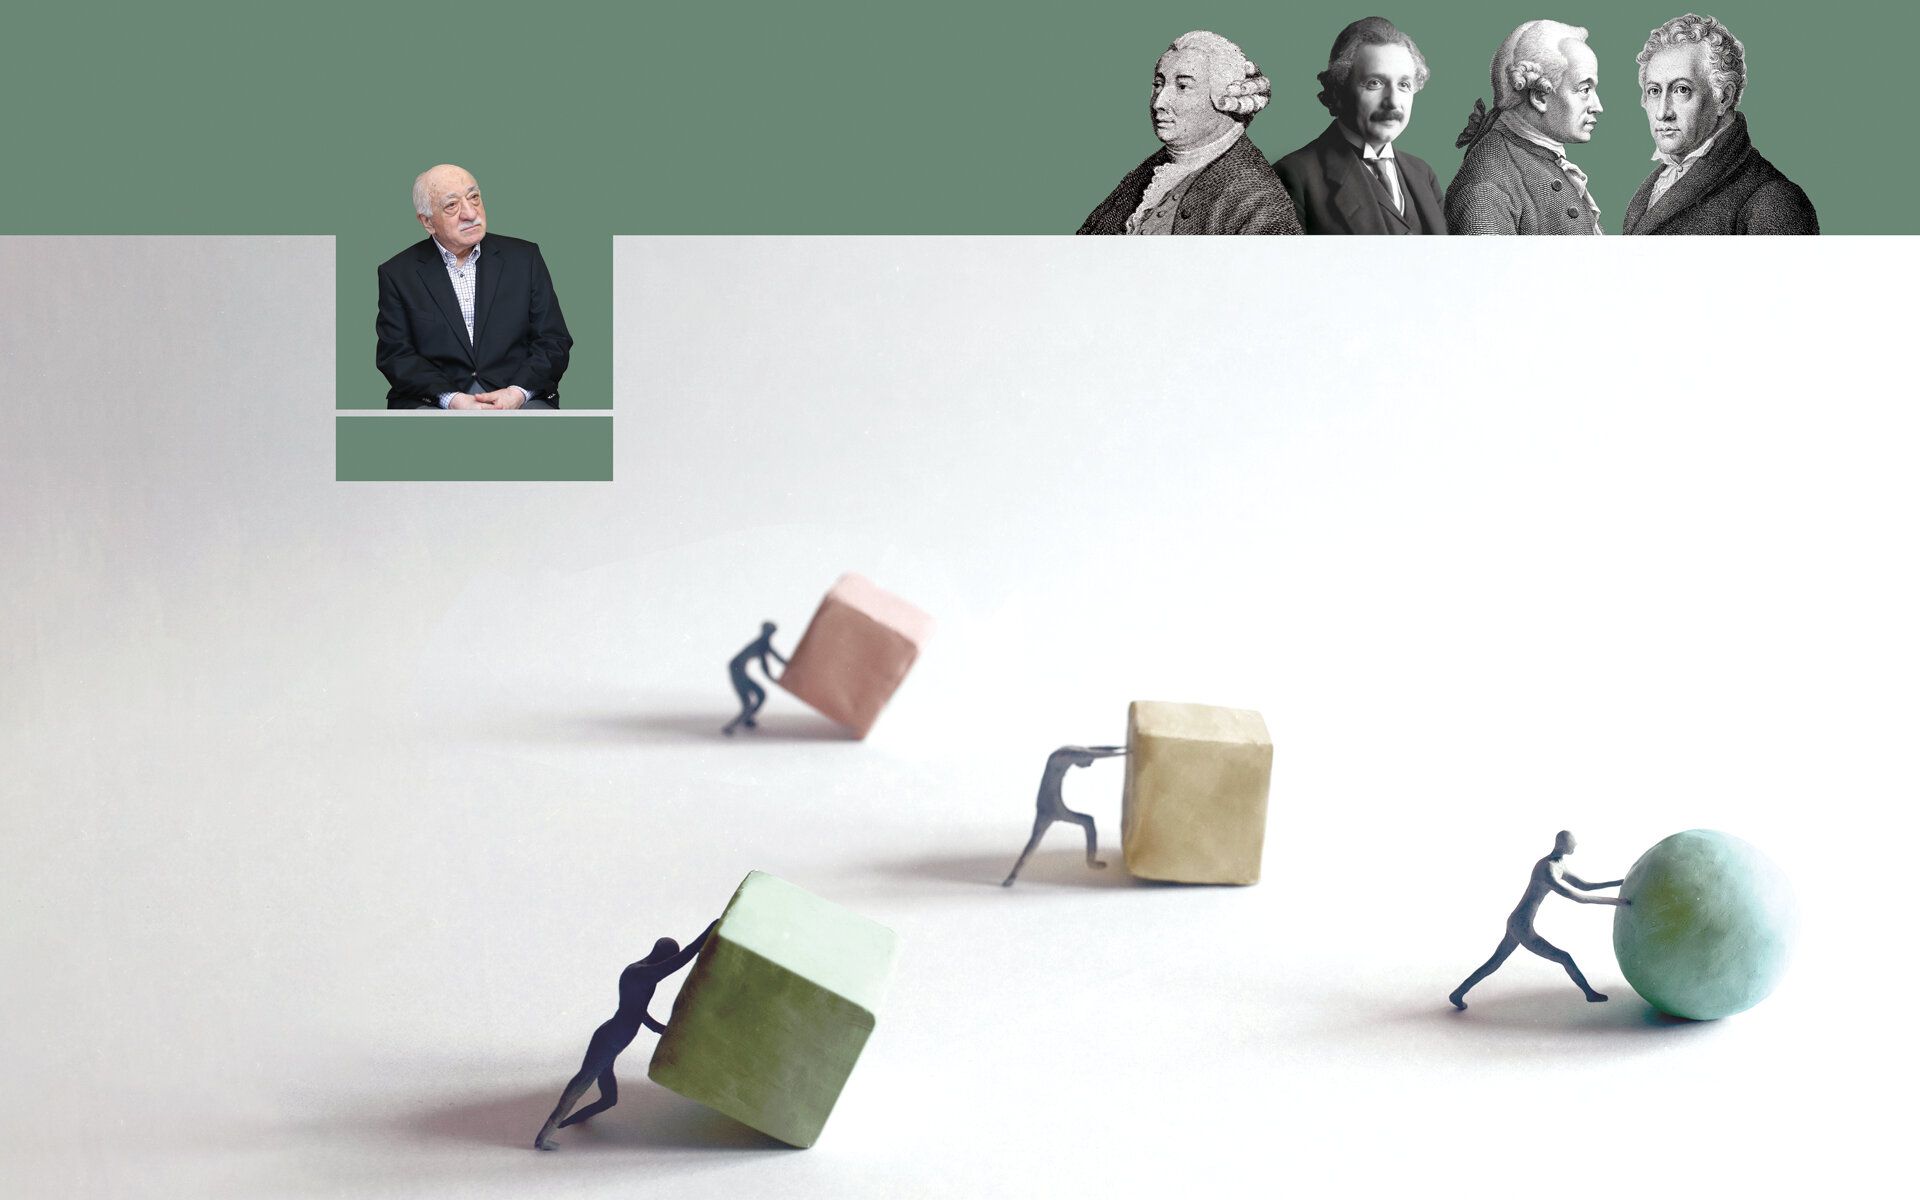 Divergent Views, Same Purpose: David Hume, Fethullah Gülen, and Others